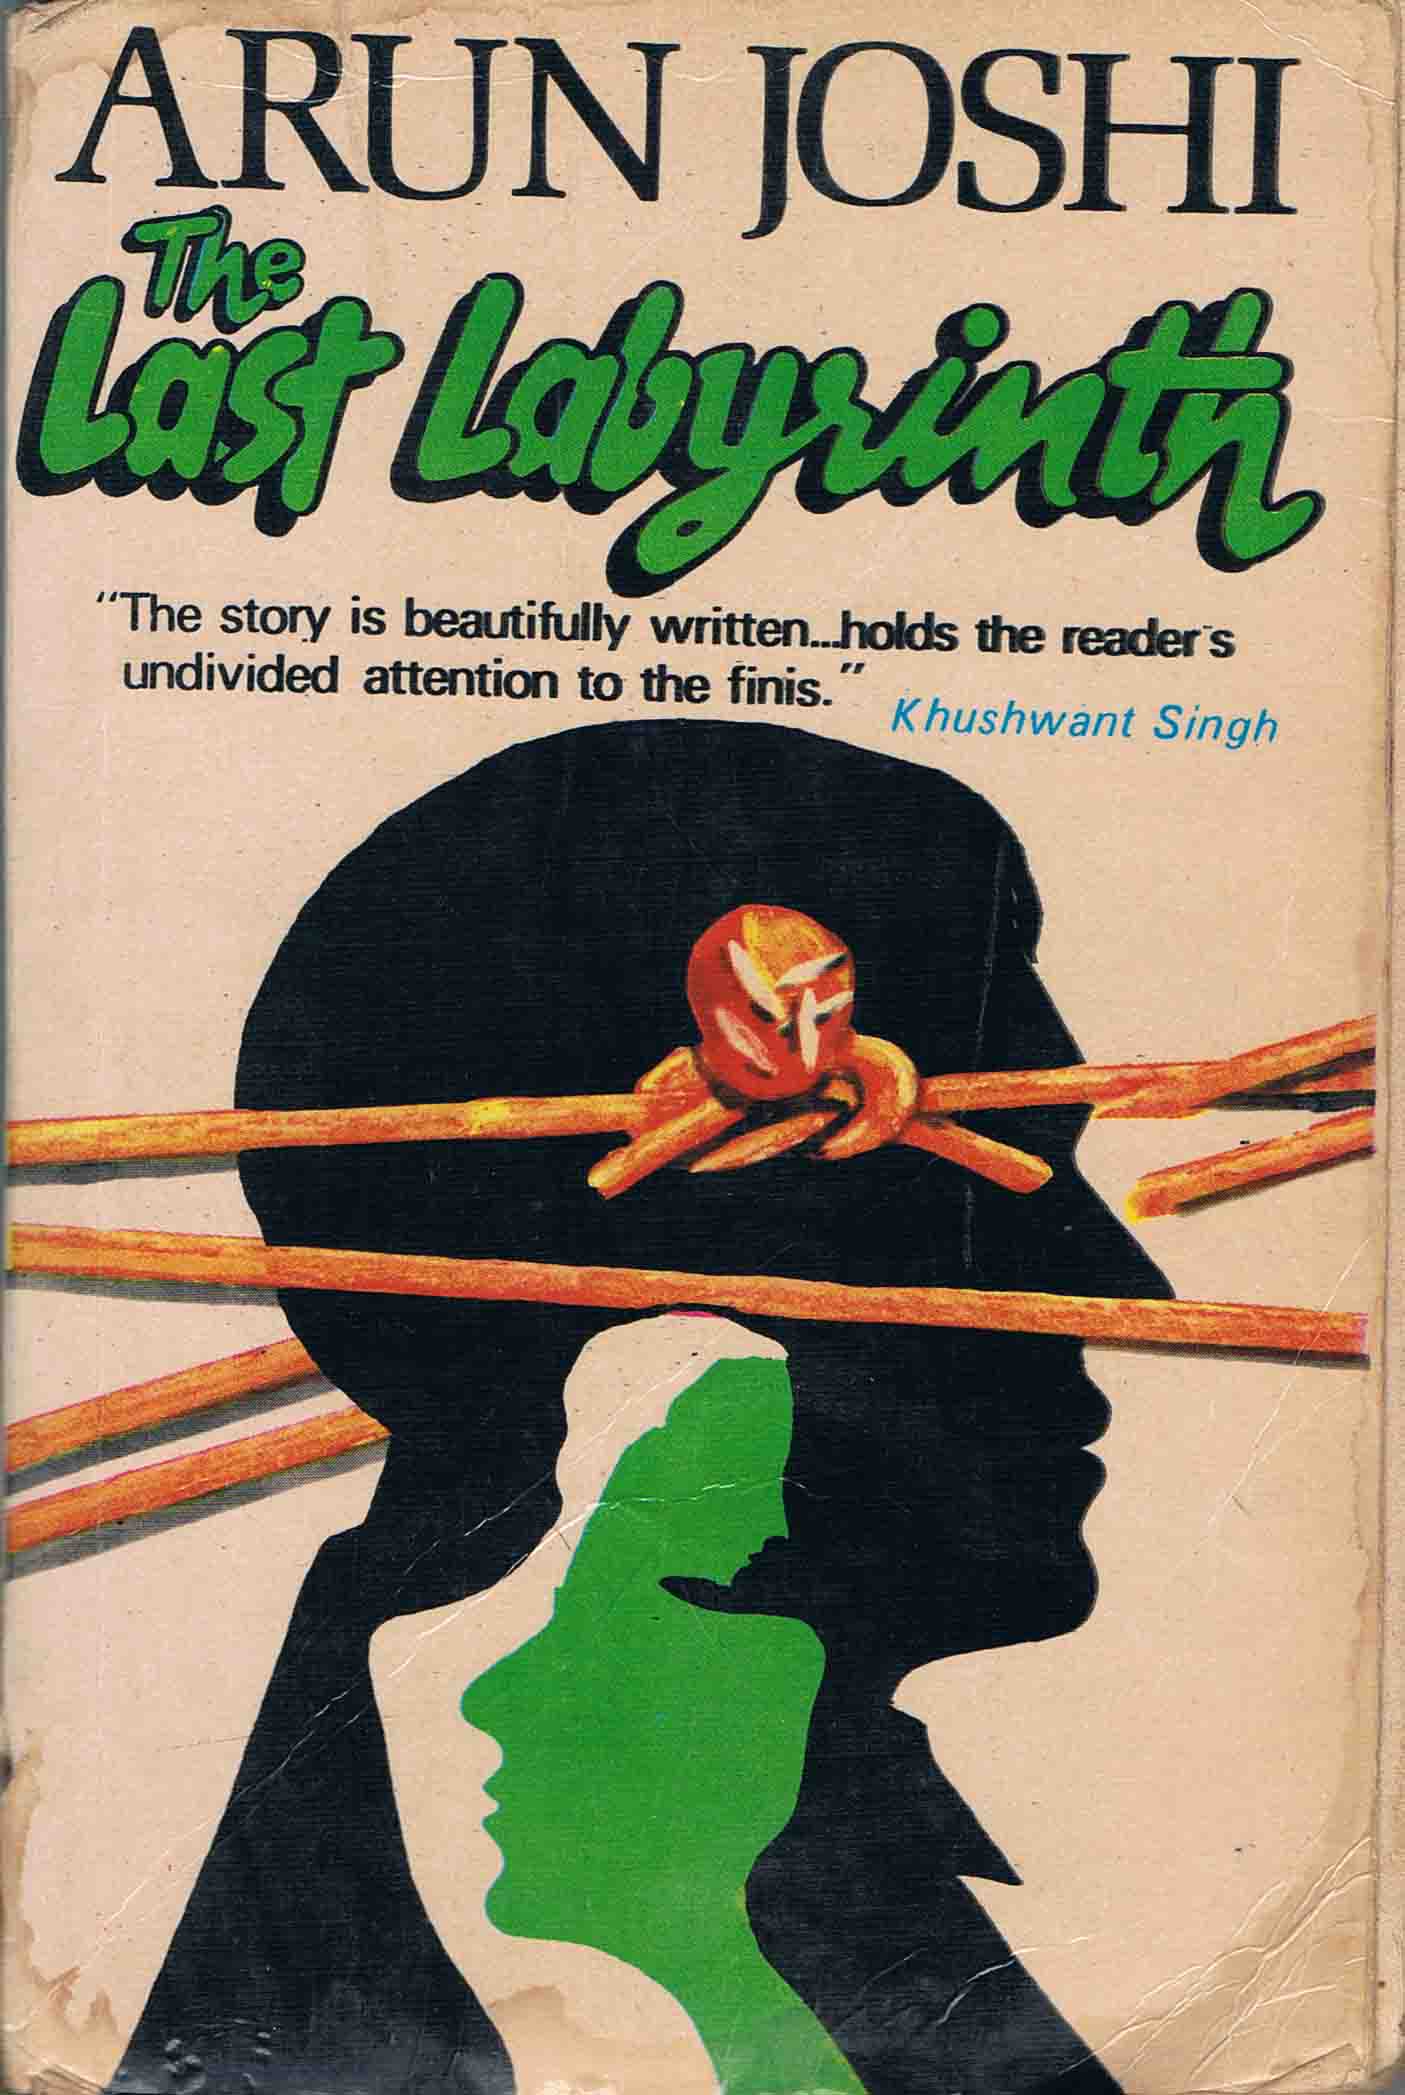 The cover page of The Labyrinth